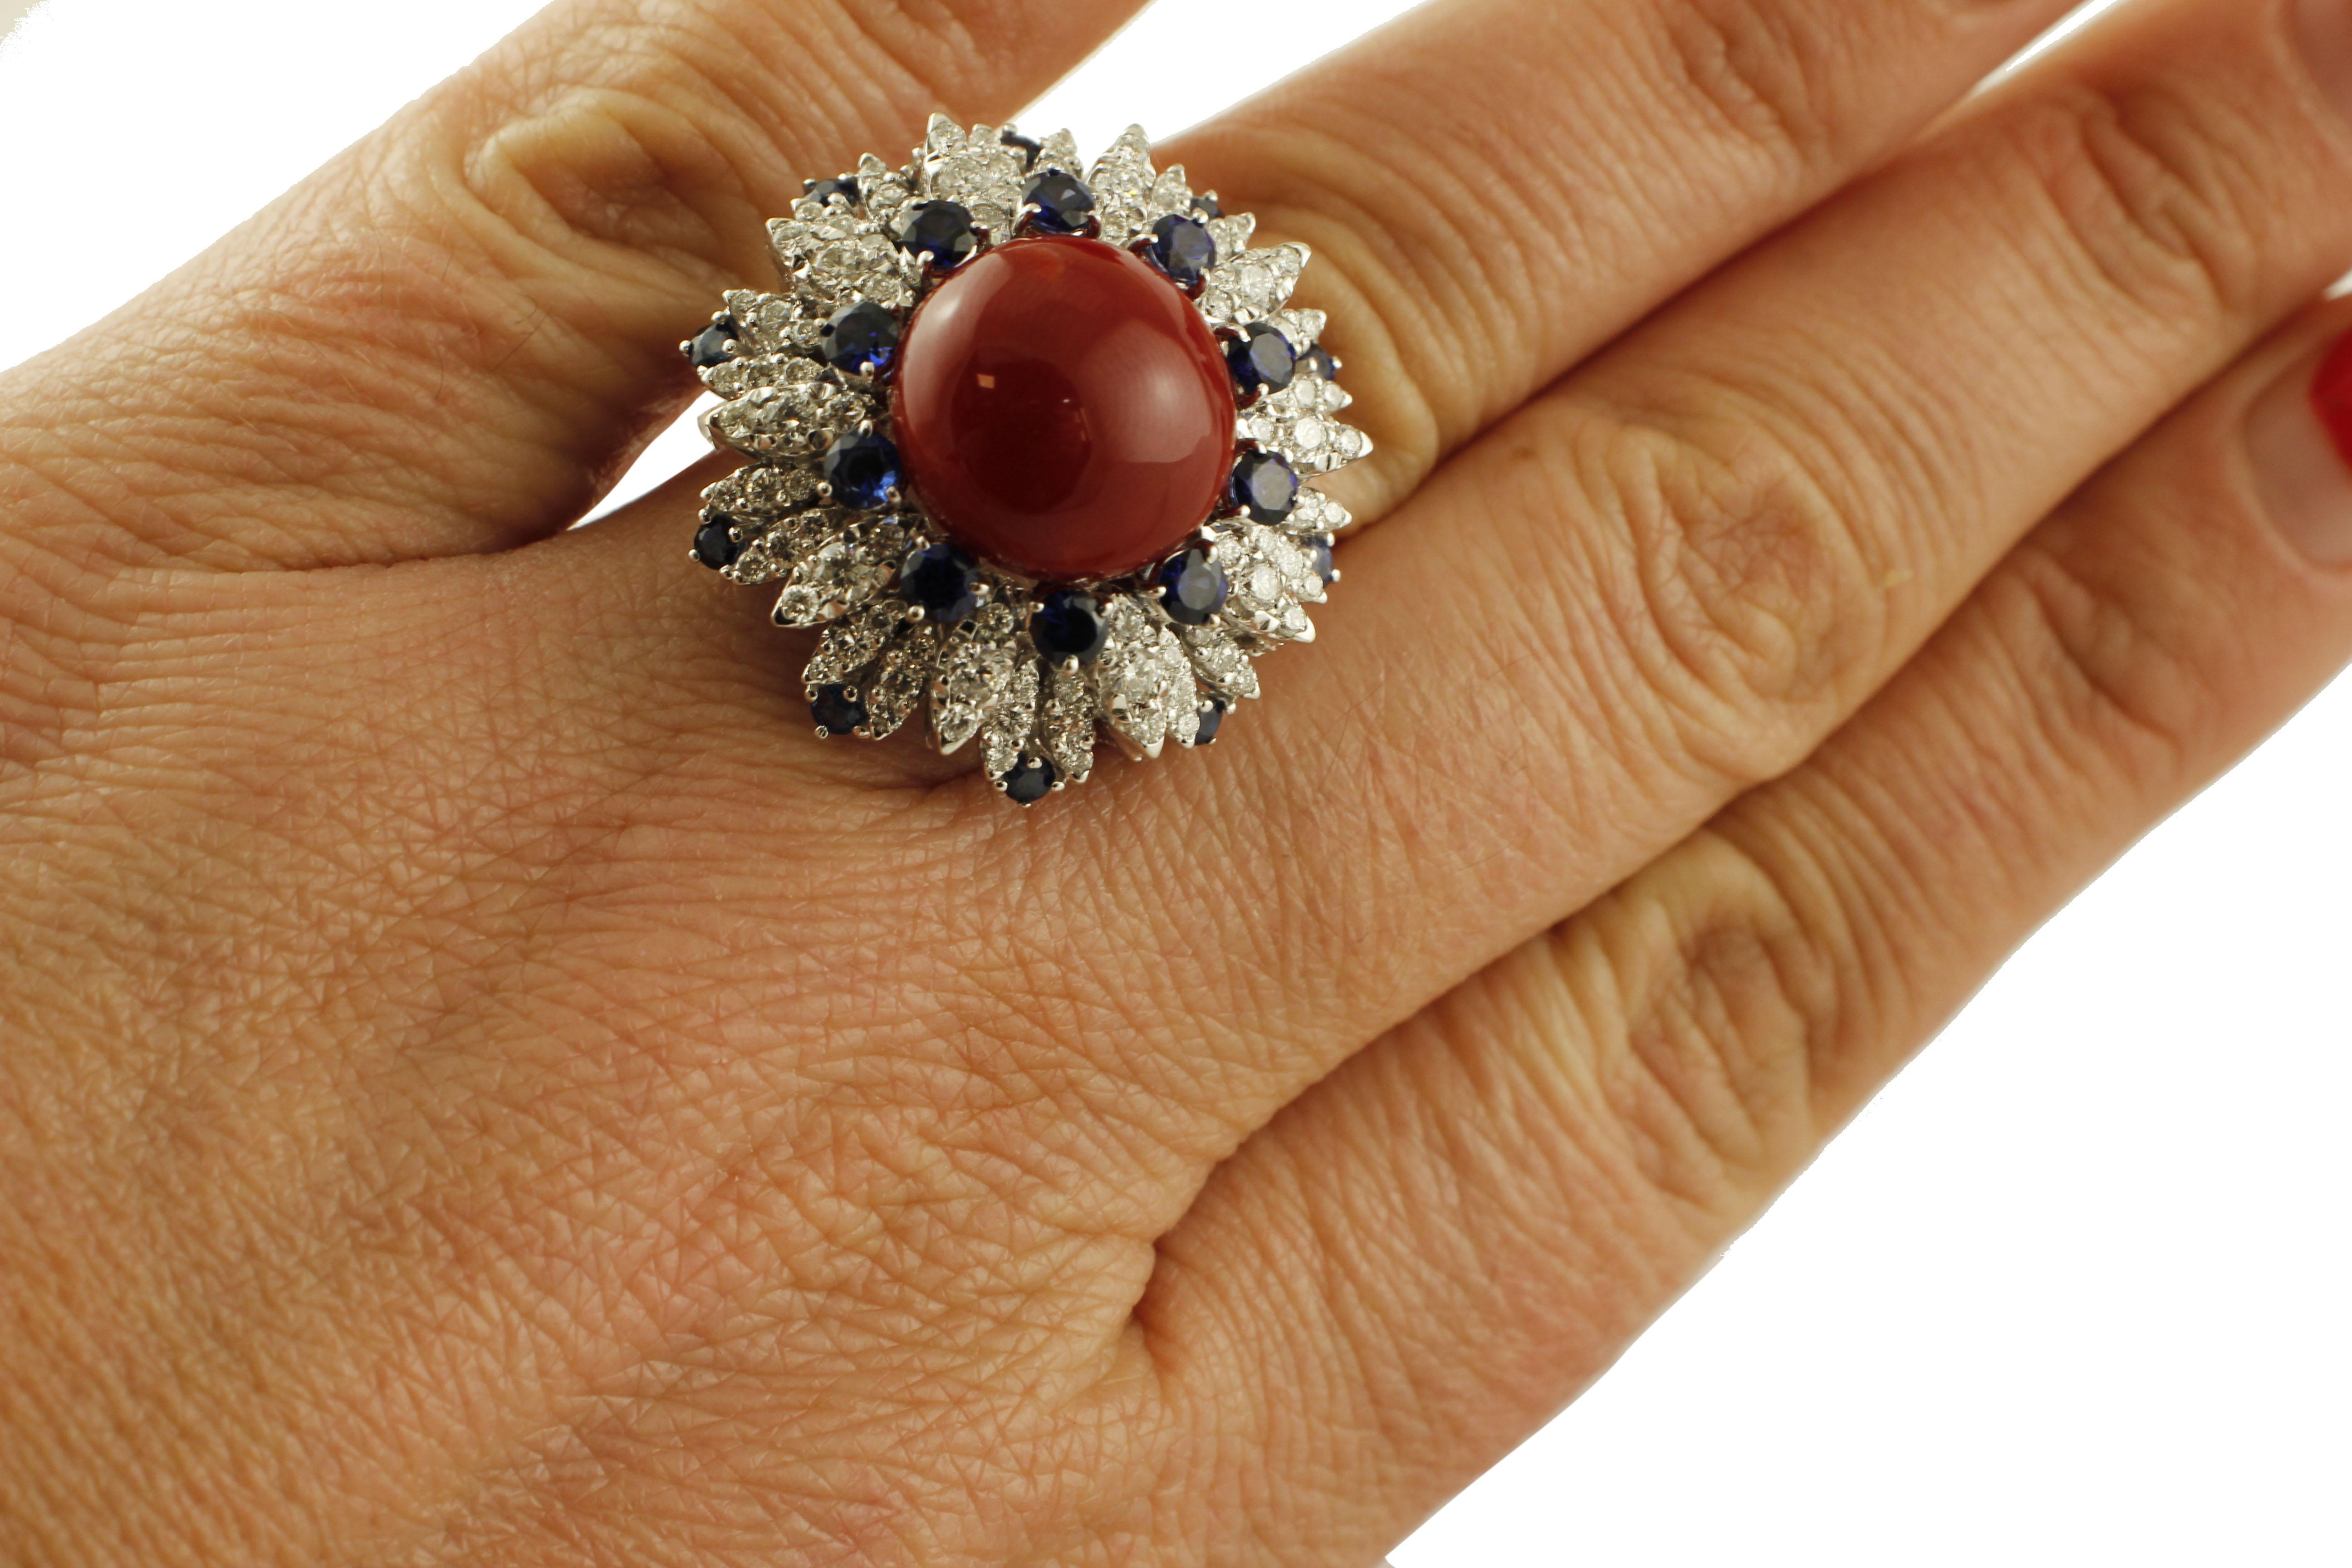 Mixed Cut Diamonds, Blue Sapphires, Red Coral Button, 14 Karat White Gold Ring